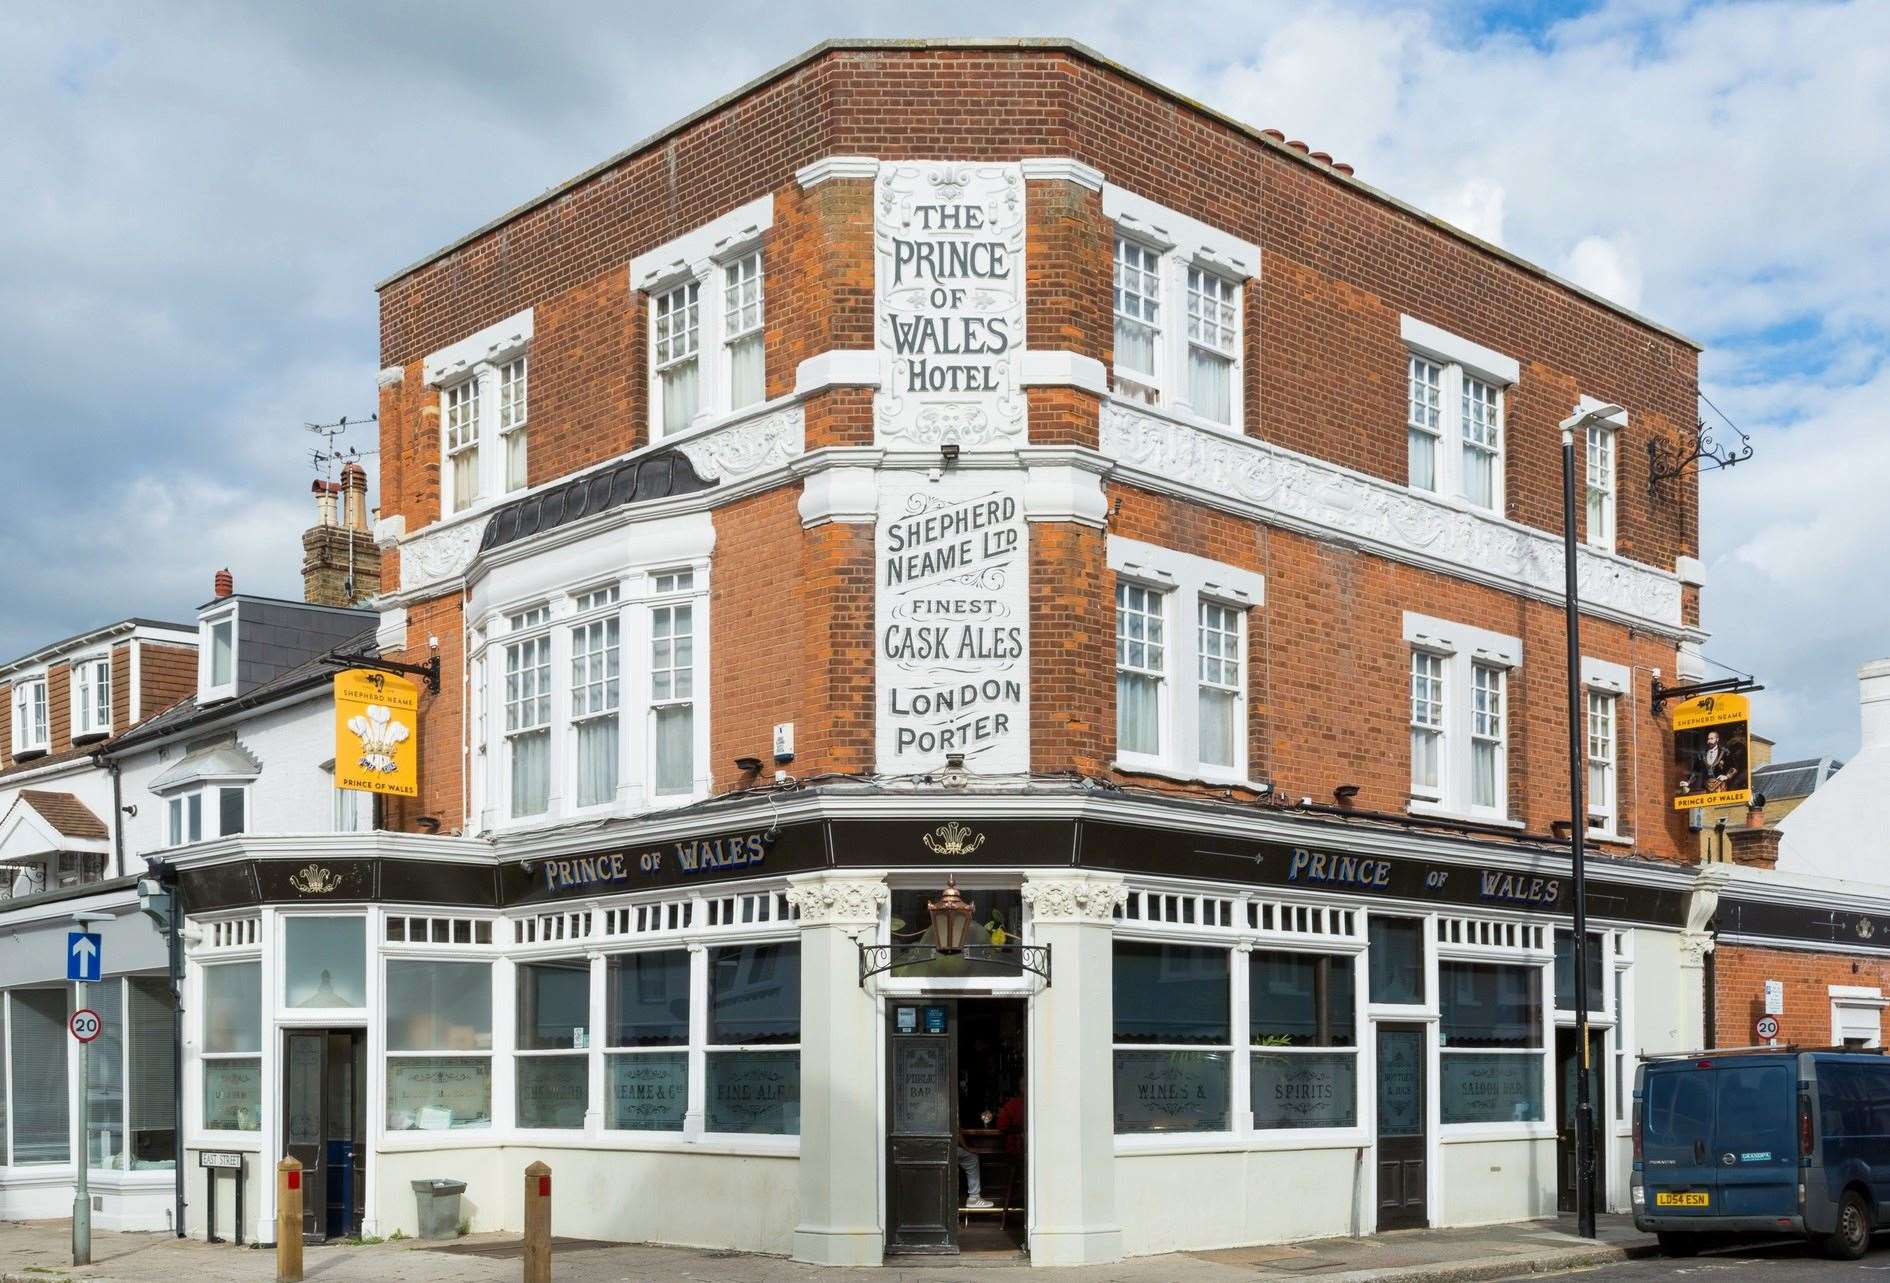 A proper old-fashioned boozer, sitting on the corner in Herne Bay, the Prince of Wales was full of life early on a Friday